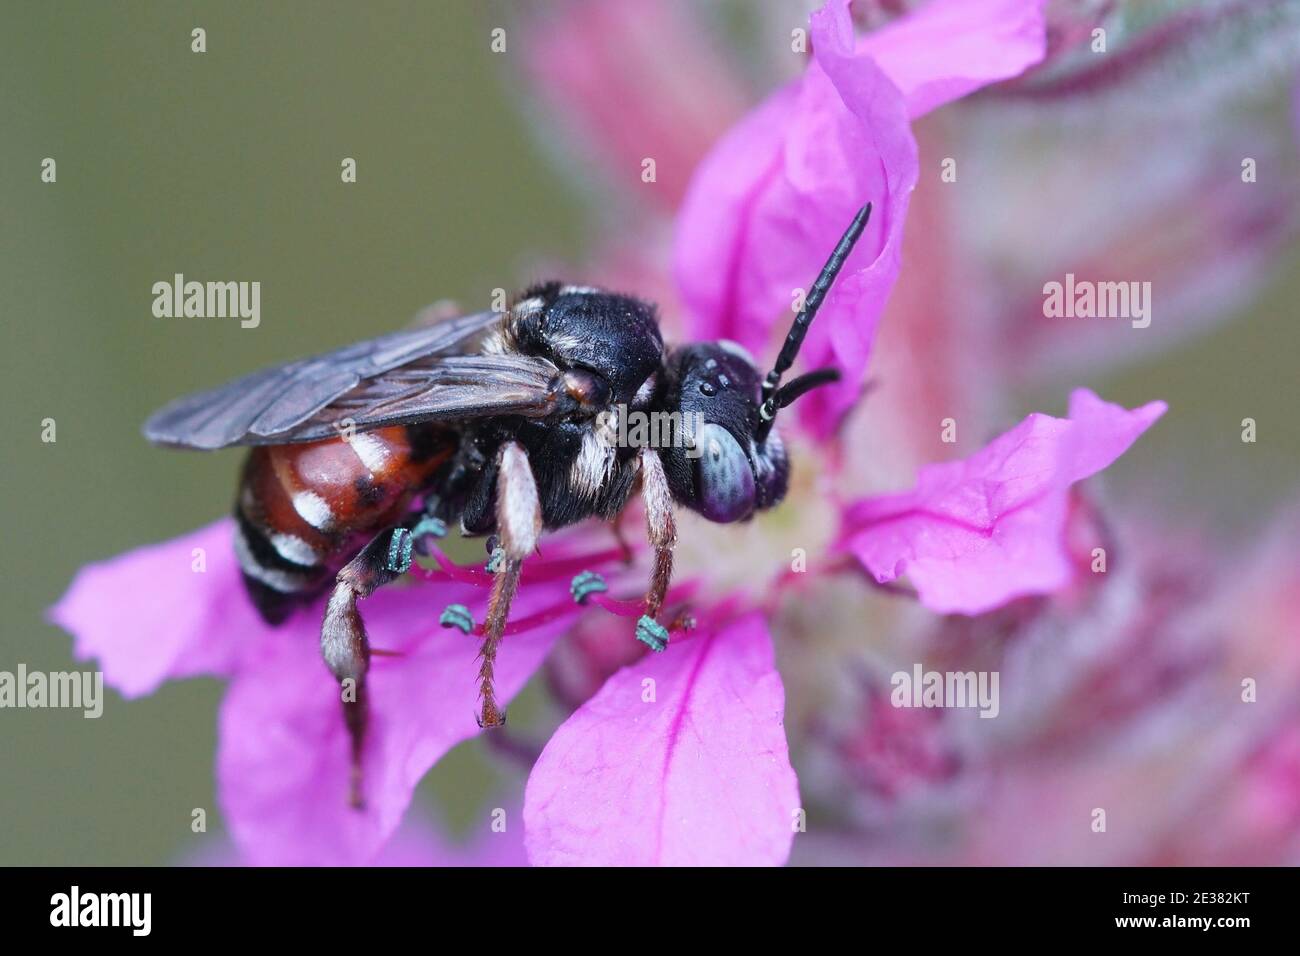 A colorful cleptoparasite bee, Epeoloides, Epeoloides, on a purple flower Stock Photo